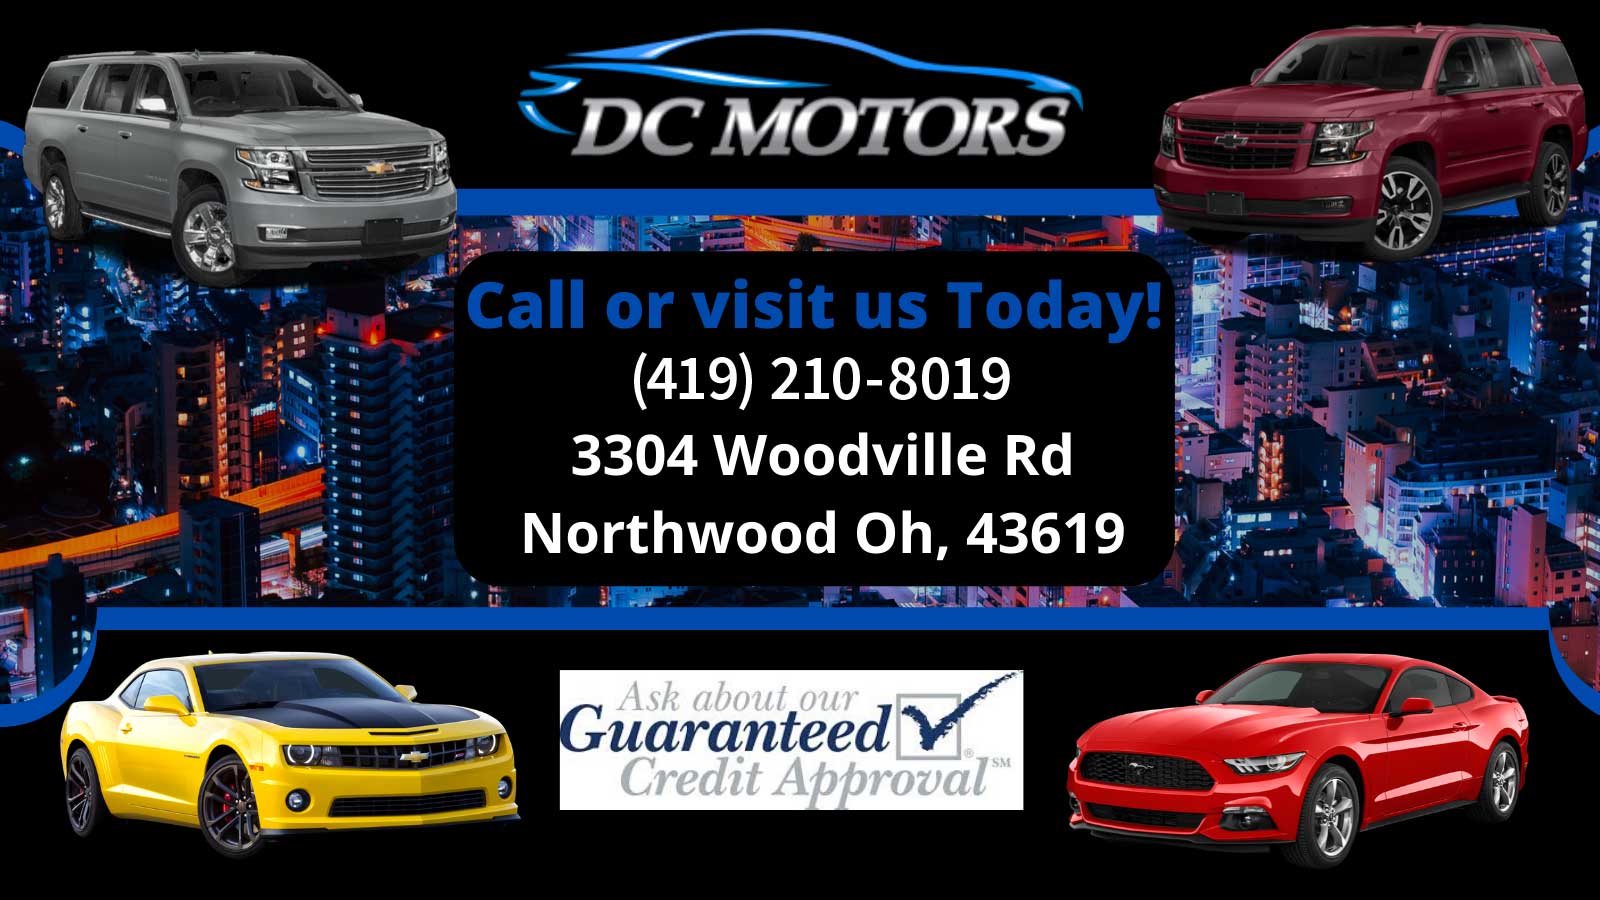 Used Car Dealers Bad Credit Near Me / Shopping For A Used Car With Bad